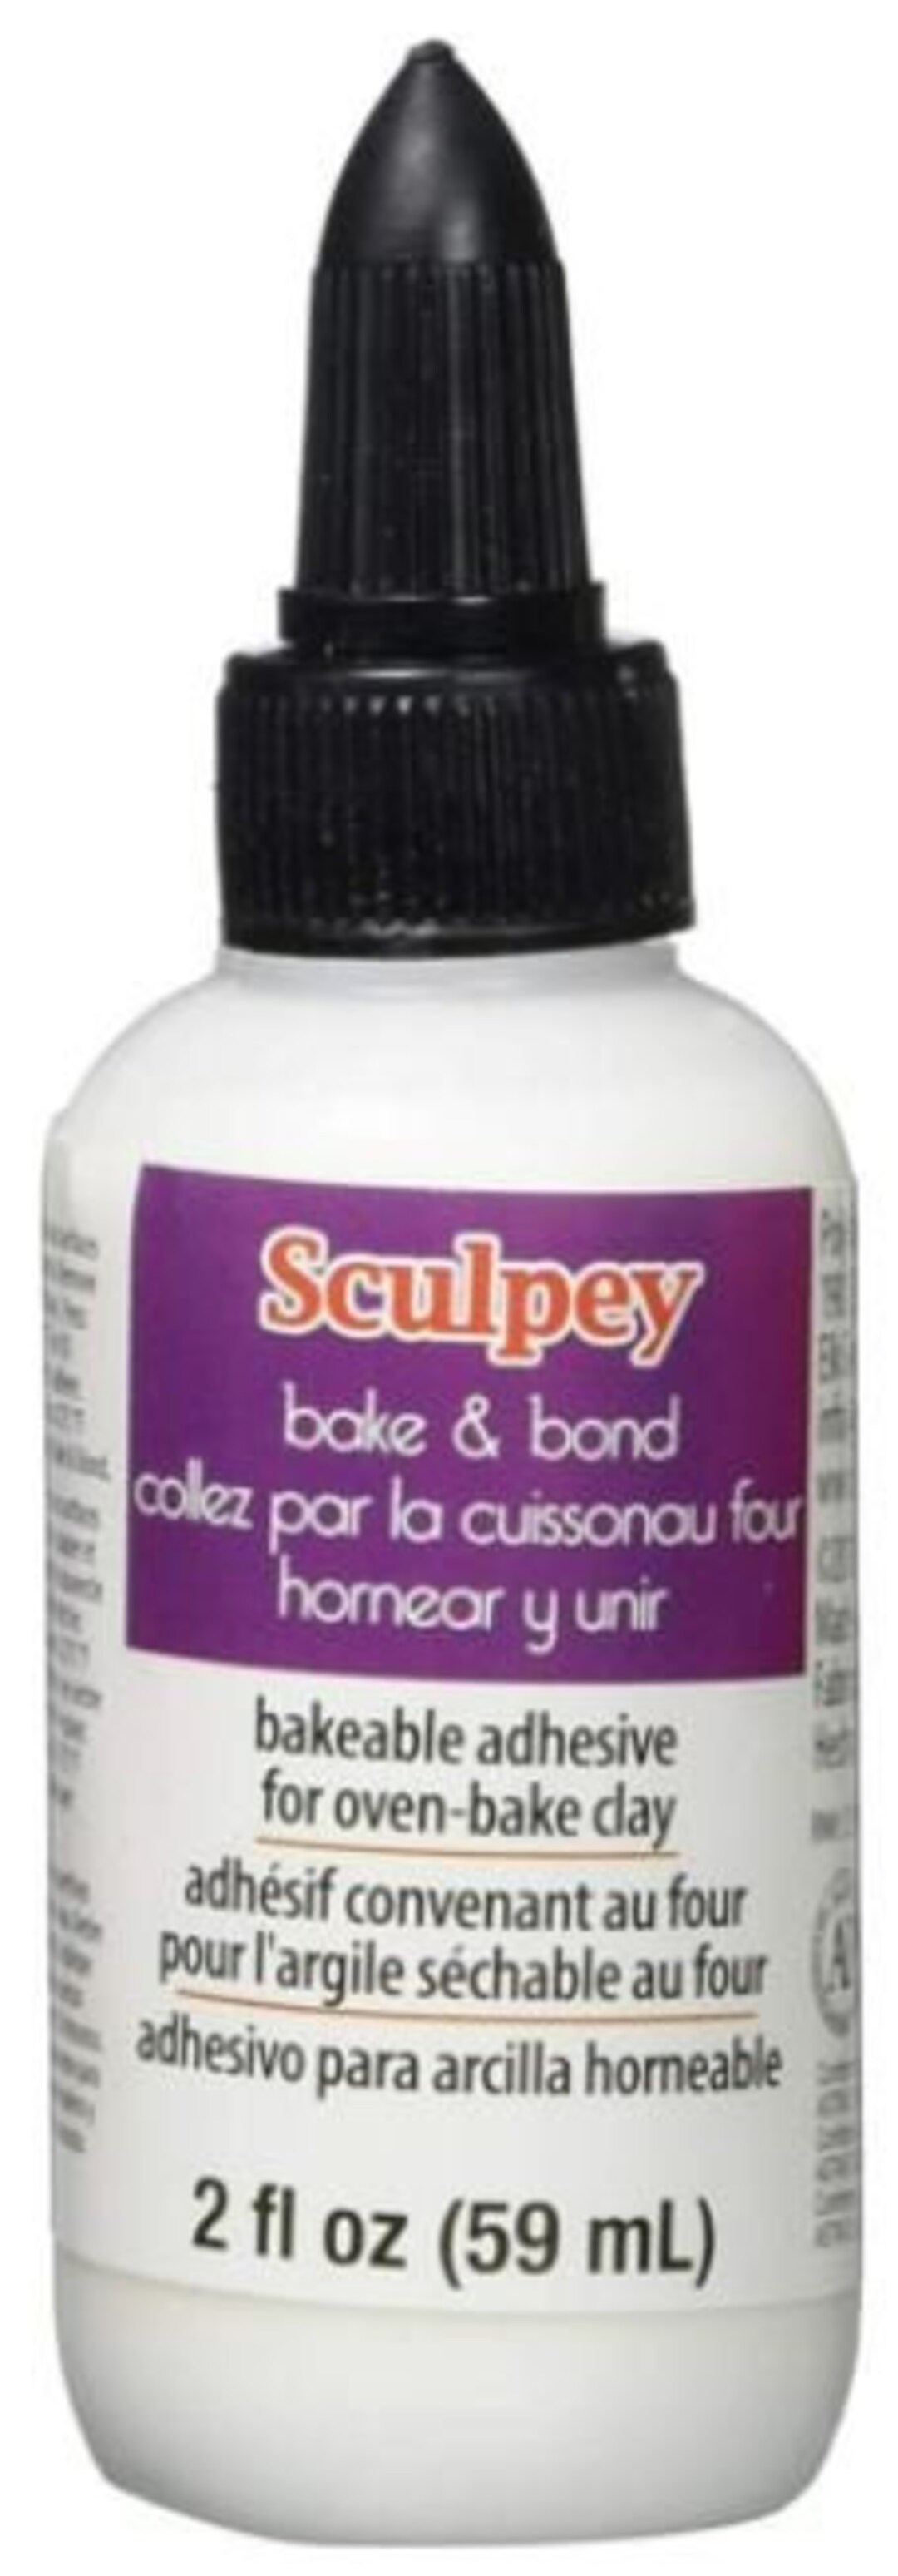 Super Sculpey Living Doll Polymer Clay 454g 1 Lb. New Package, 